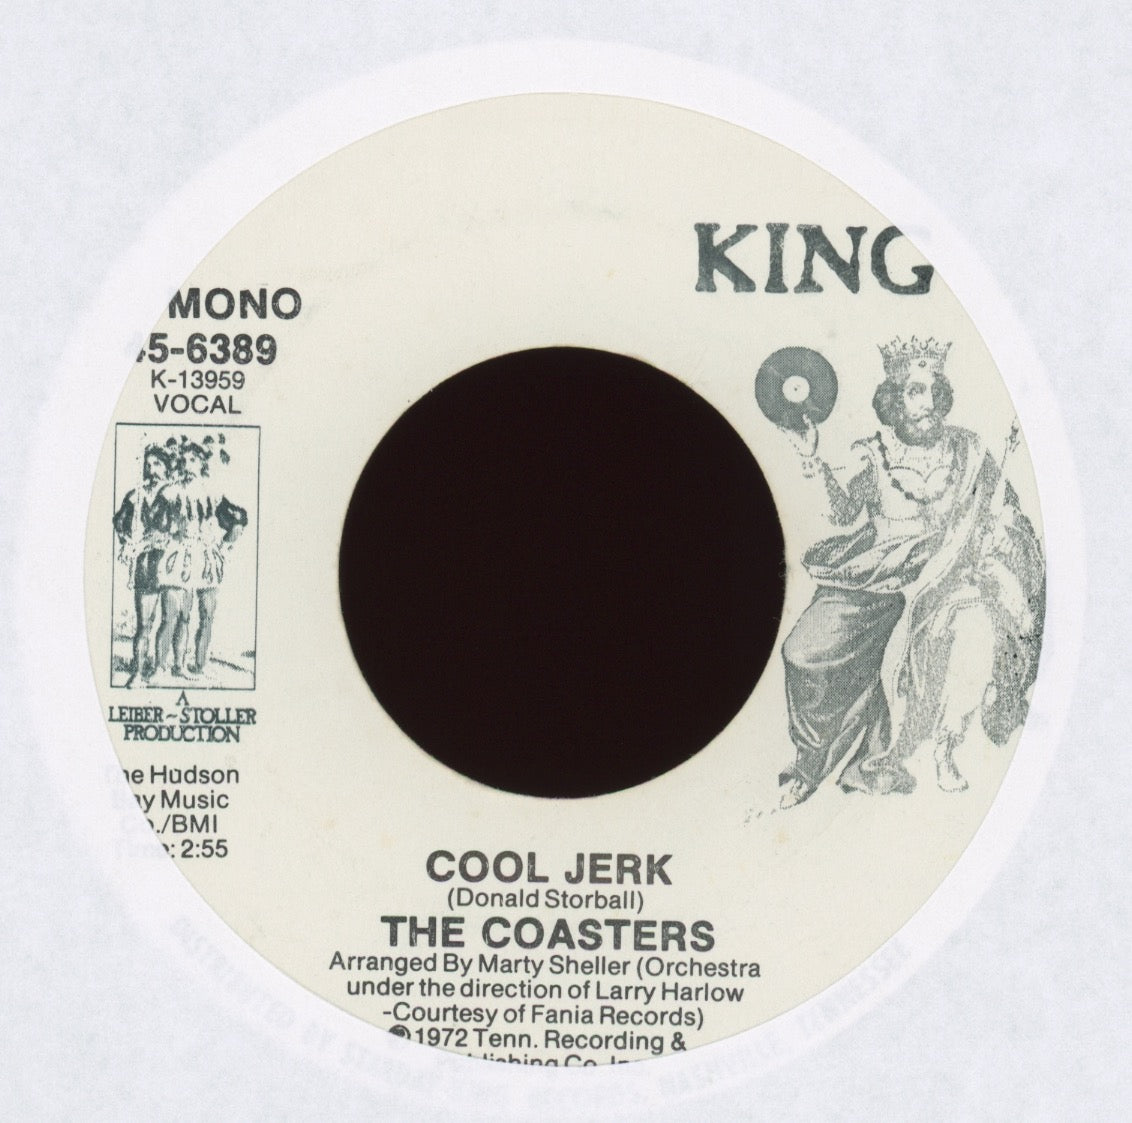 The Coasters - Cool Jerk on King Promo